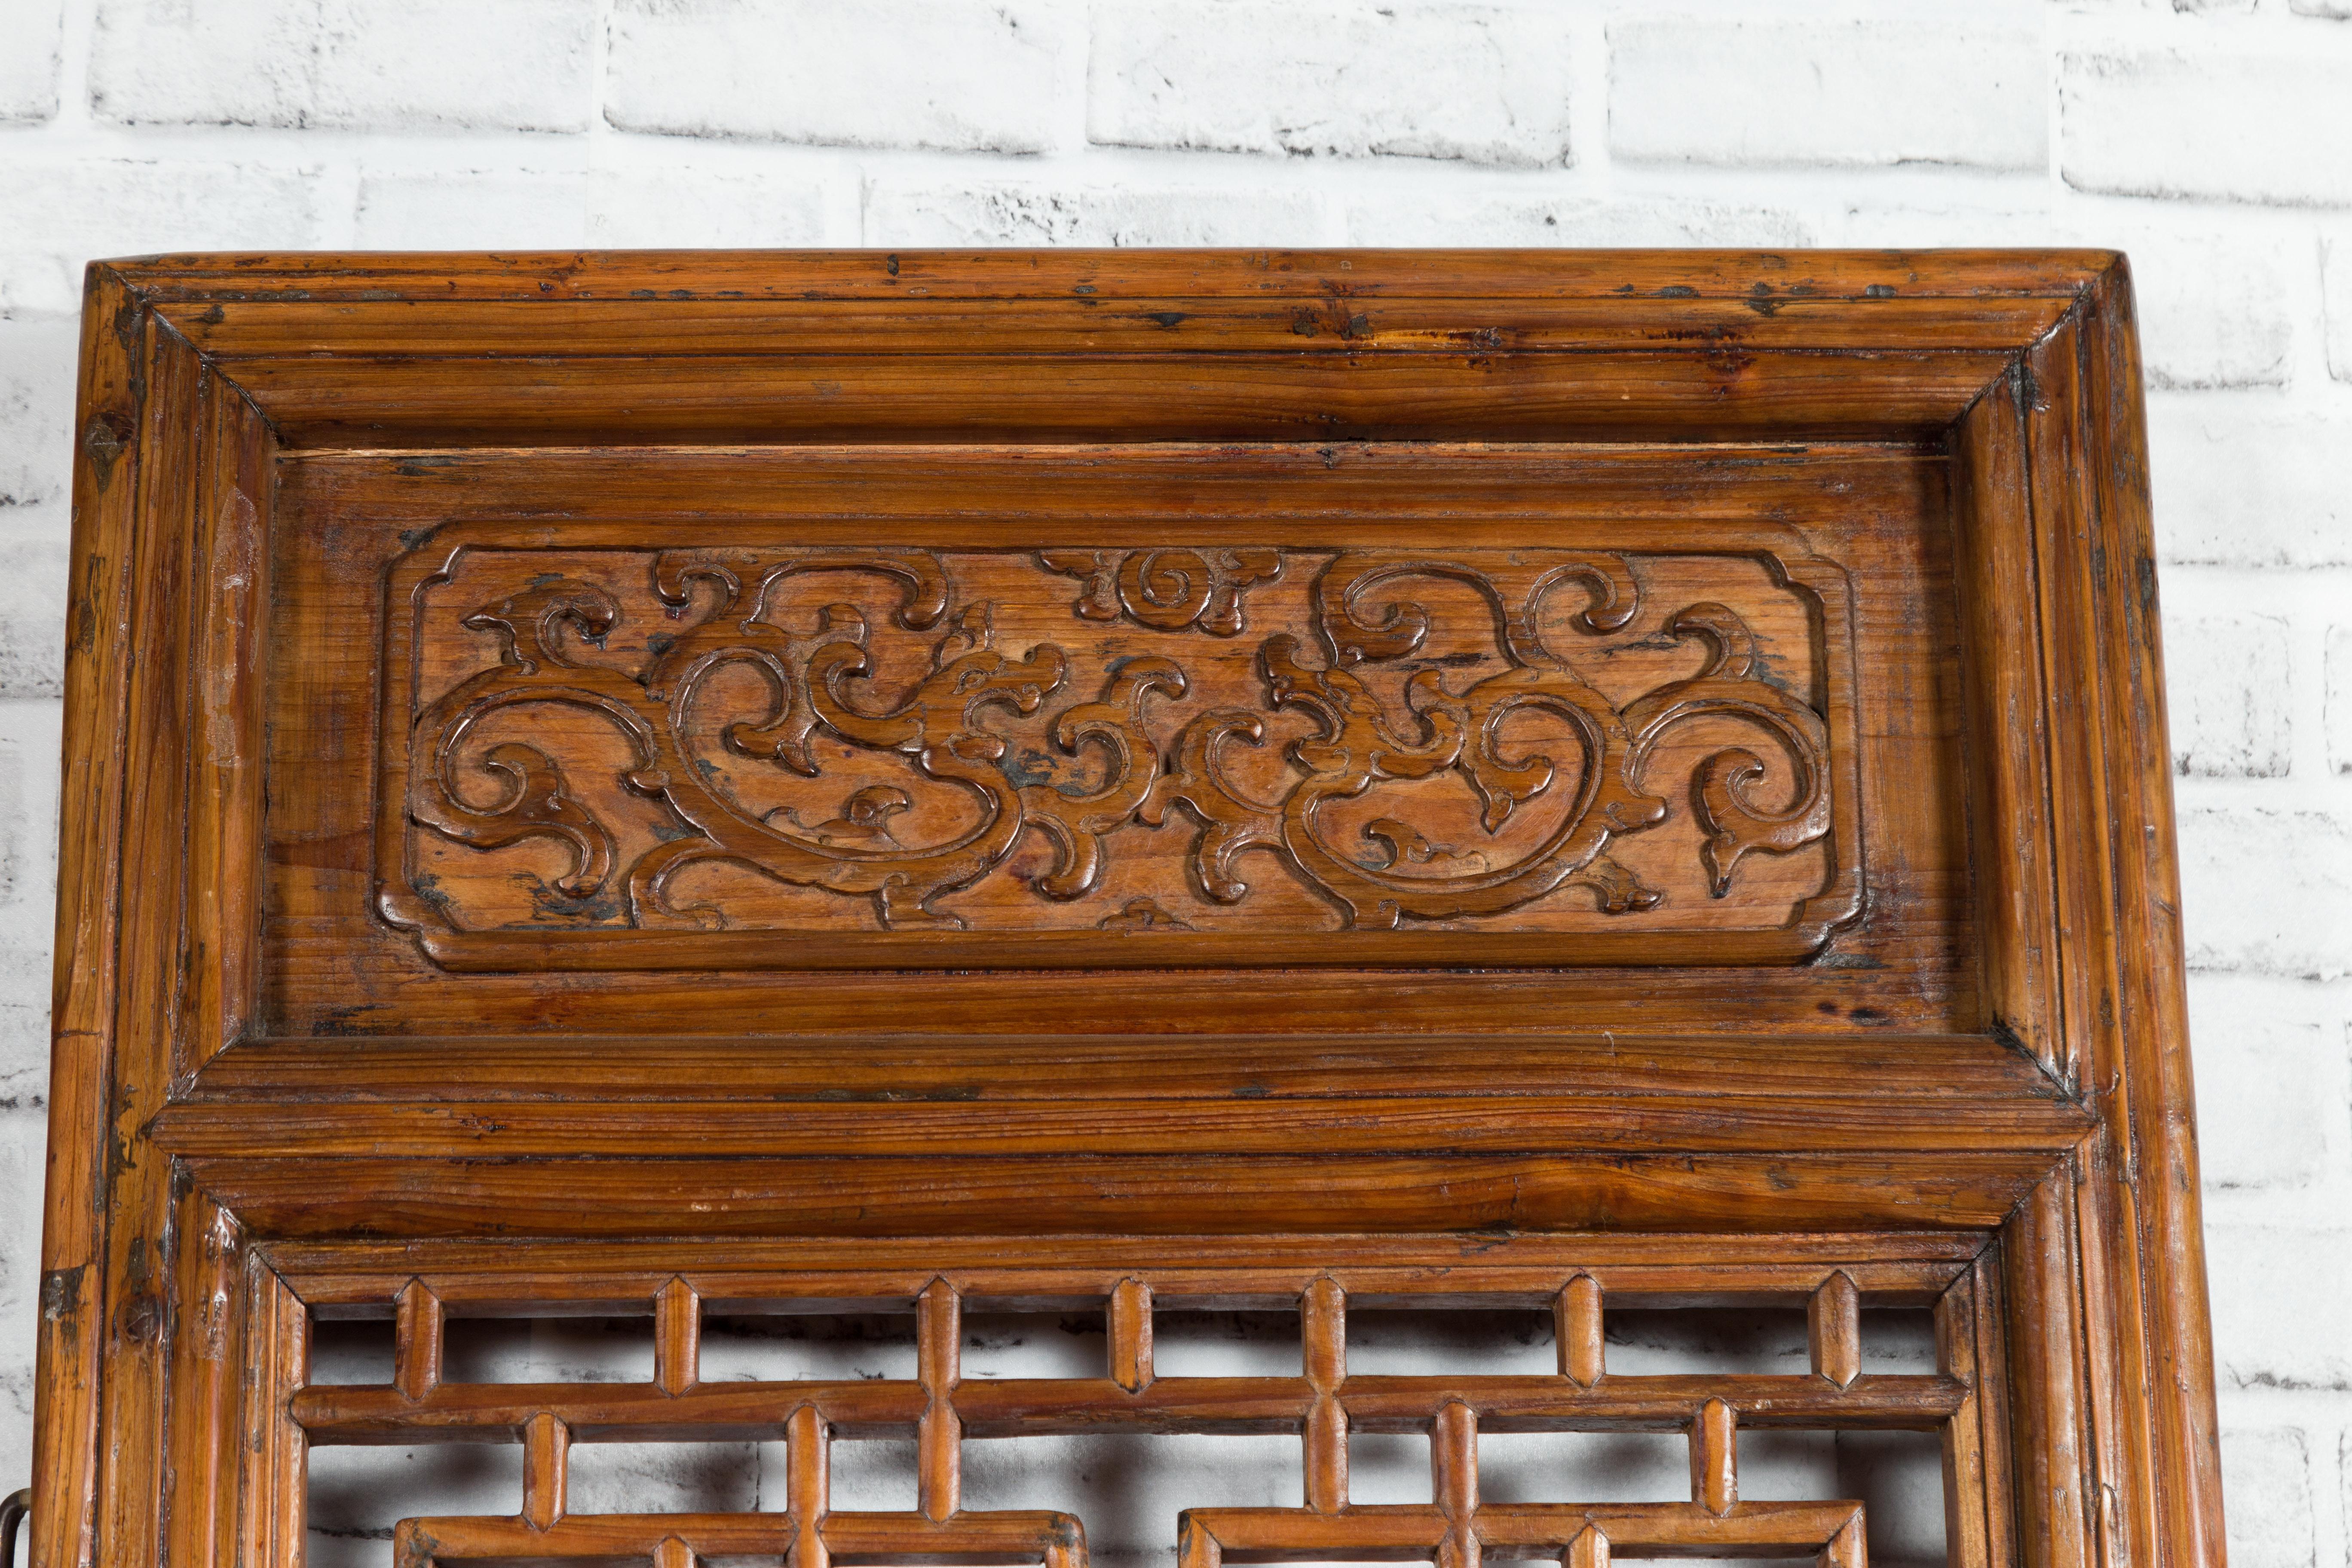 Pair of Chinese 19th Century Screens with Fretwork and Low-Relief Carved Panels 5